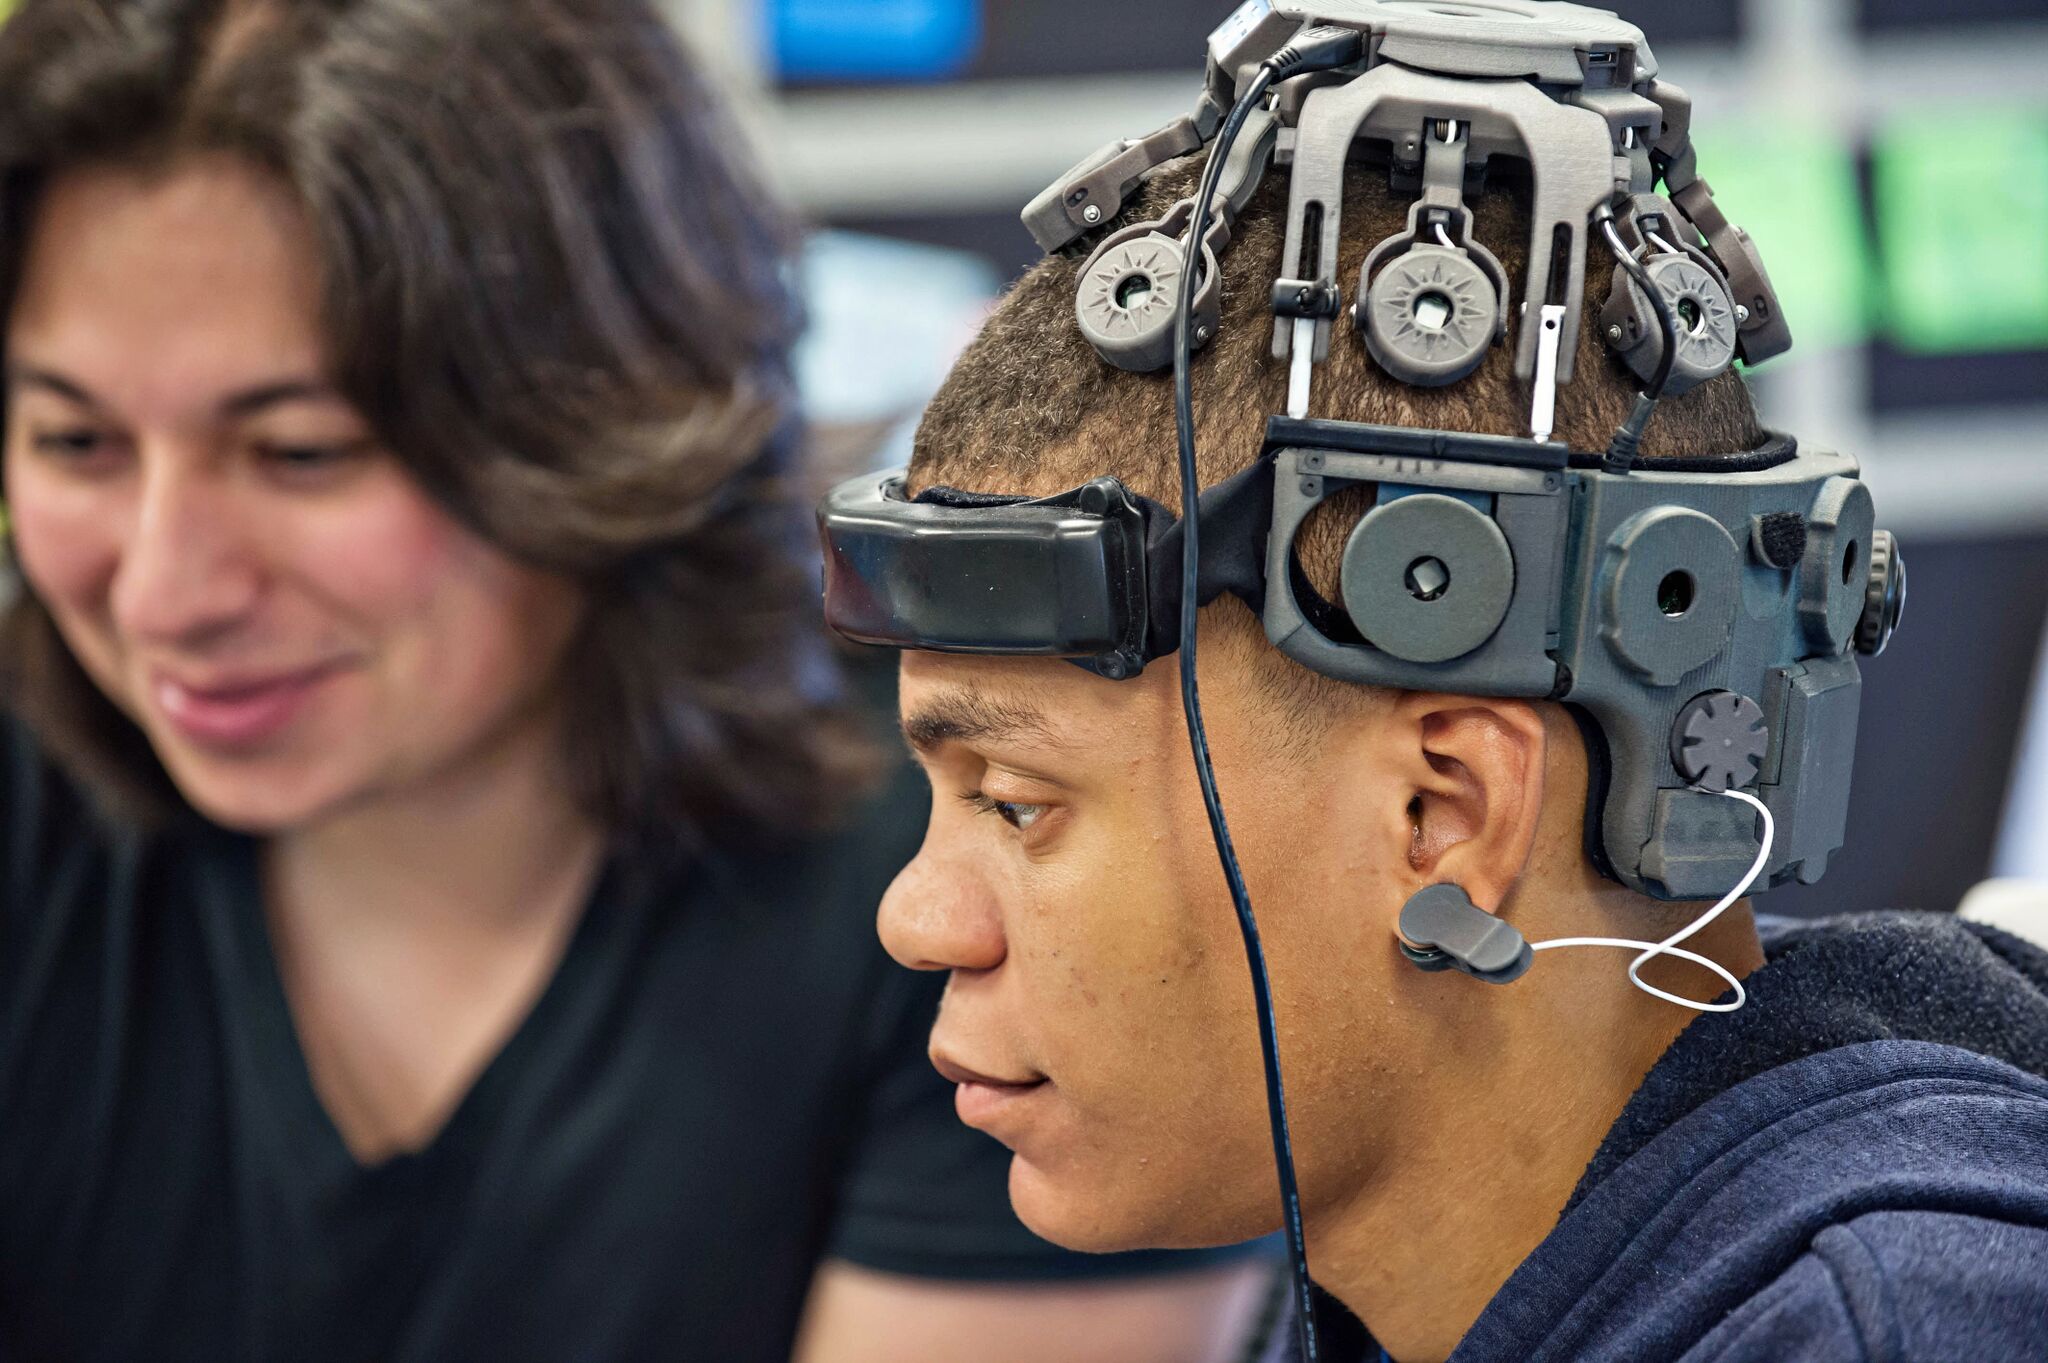 Neurable nets $2 million to build brain-controlled software for AR and VR.